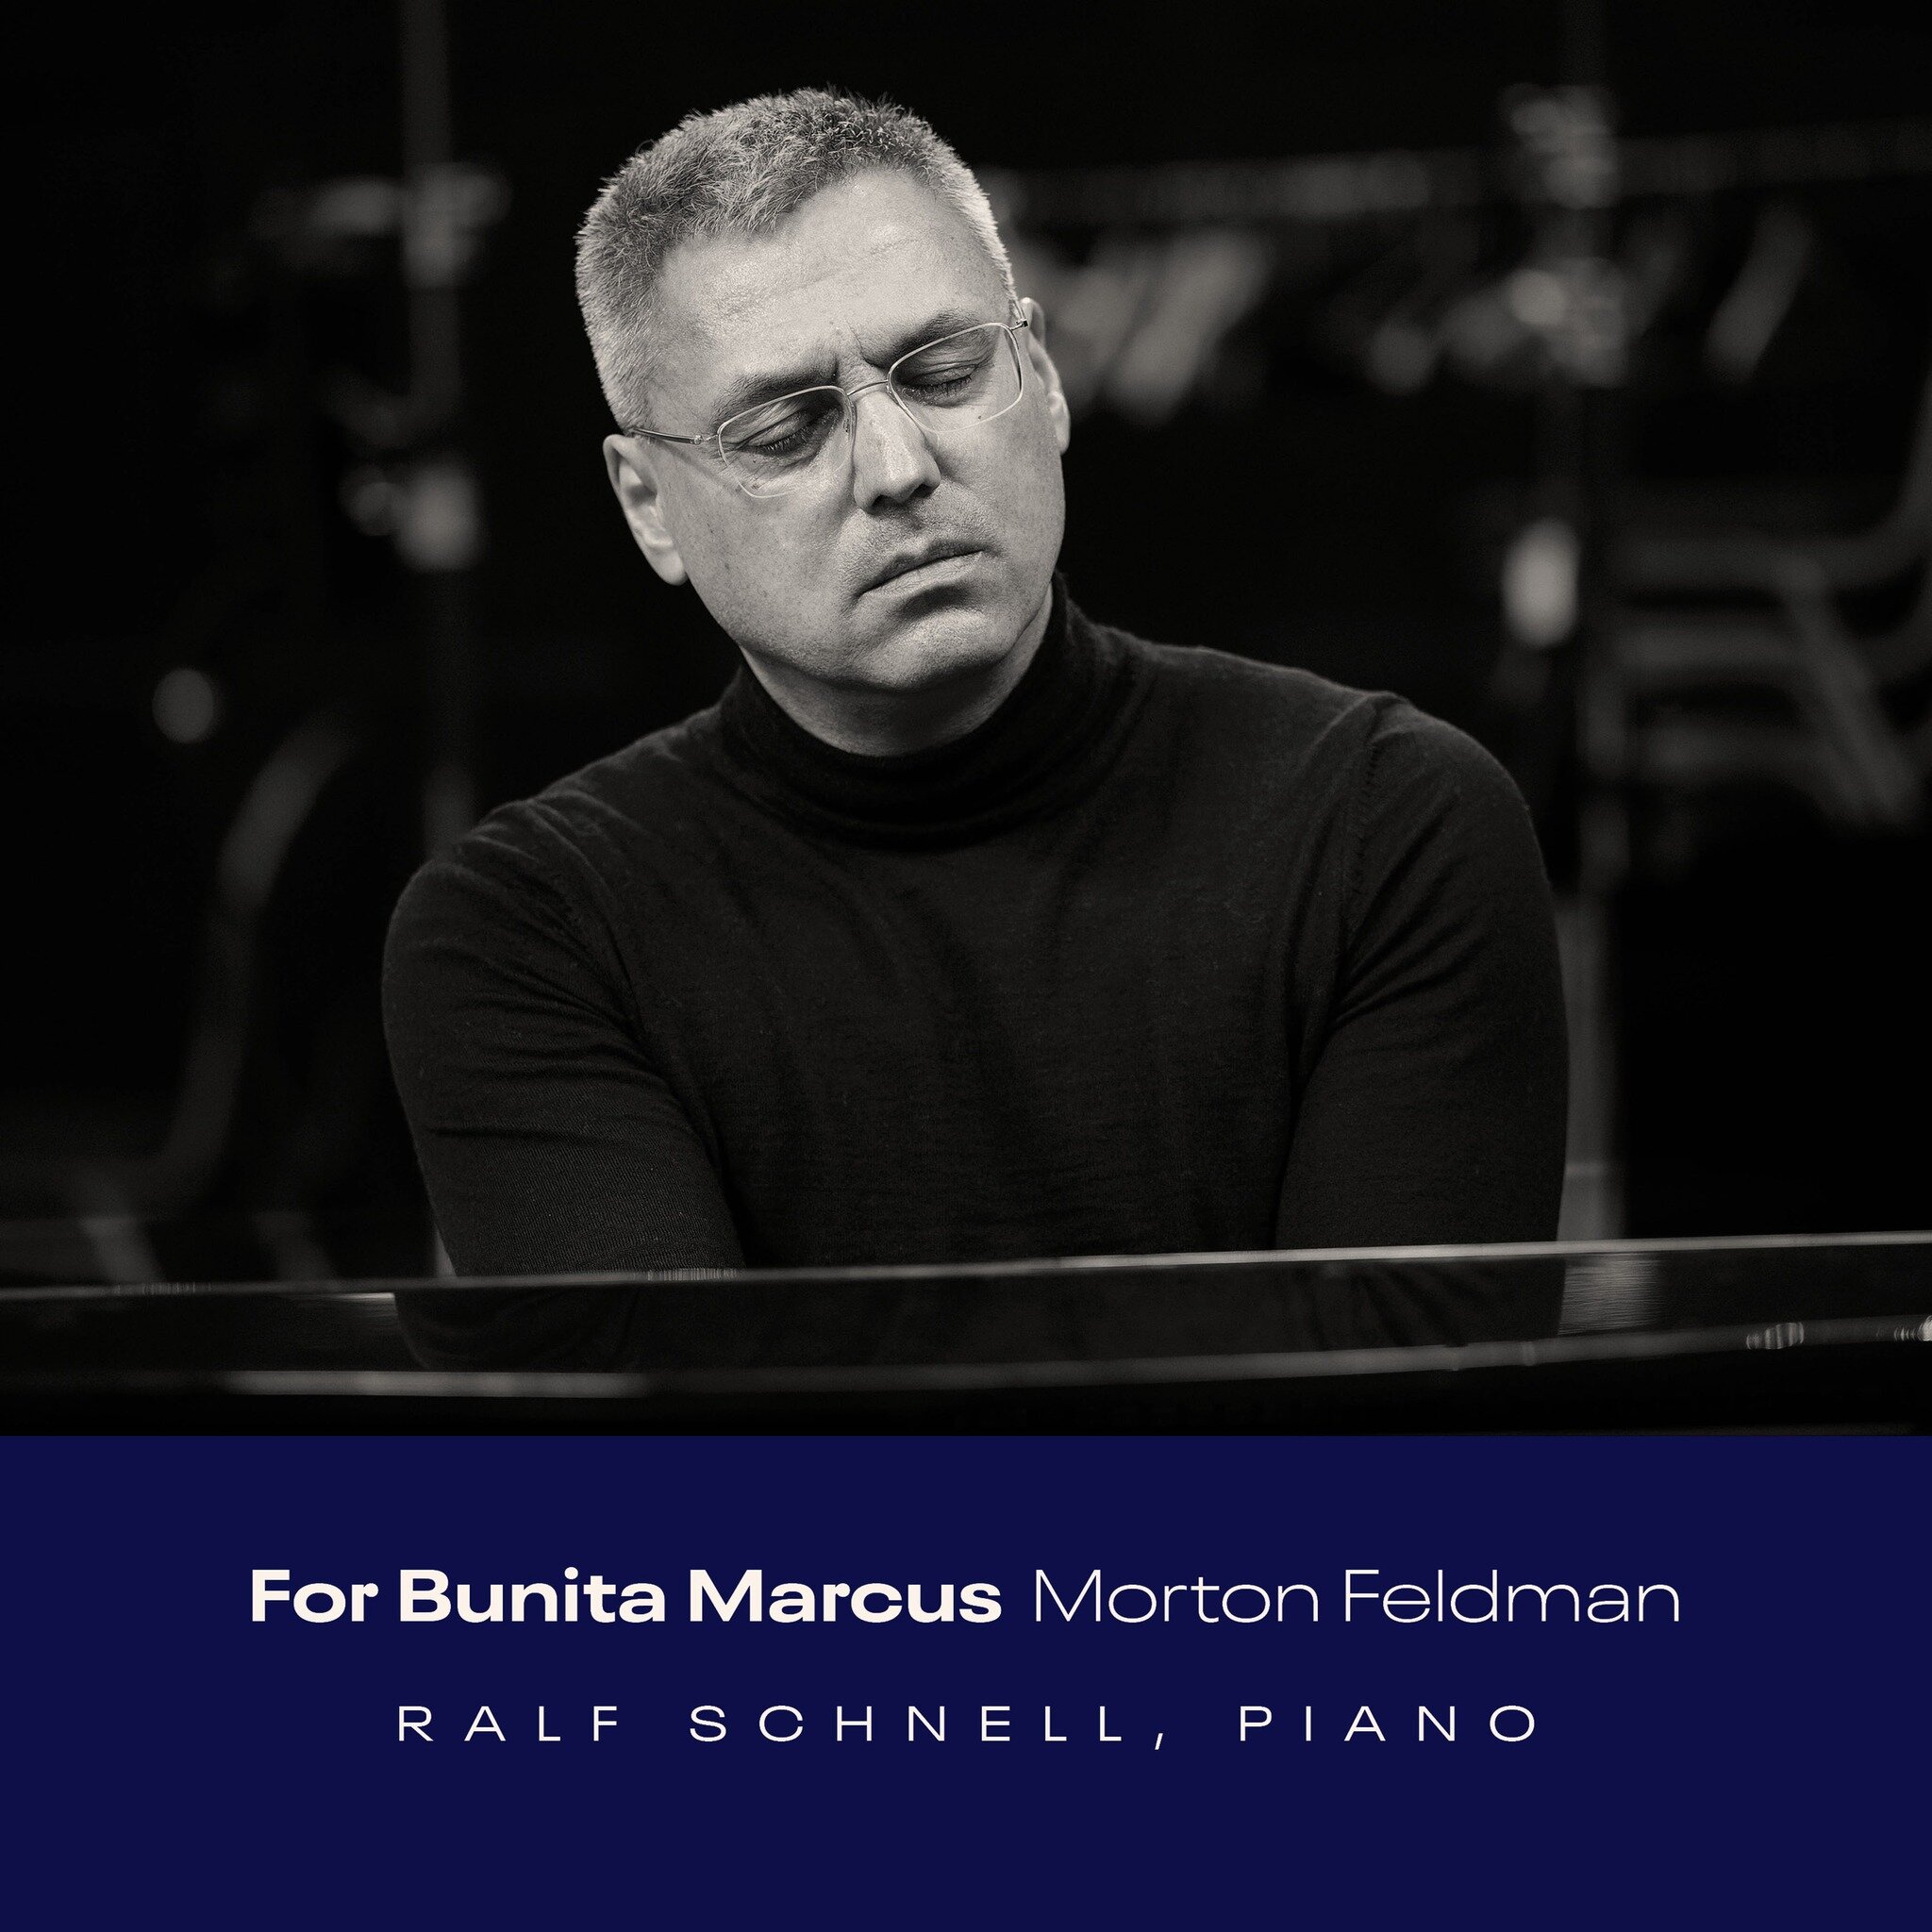 ⭐️ NEW MUSIC FRIDAY ⭐️

#VOCES8Records is pleased to release the debut album from Ralf Schnell.

Creating a haunting and meditative landscape of subtle beauty, Morton Feldman's 'For Bunita Marcus' is a continuous stream of music from beginning to end